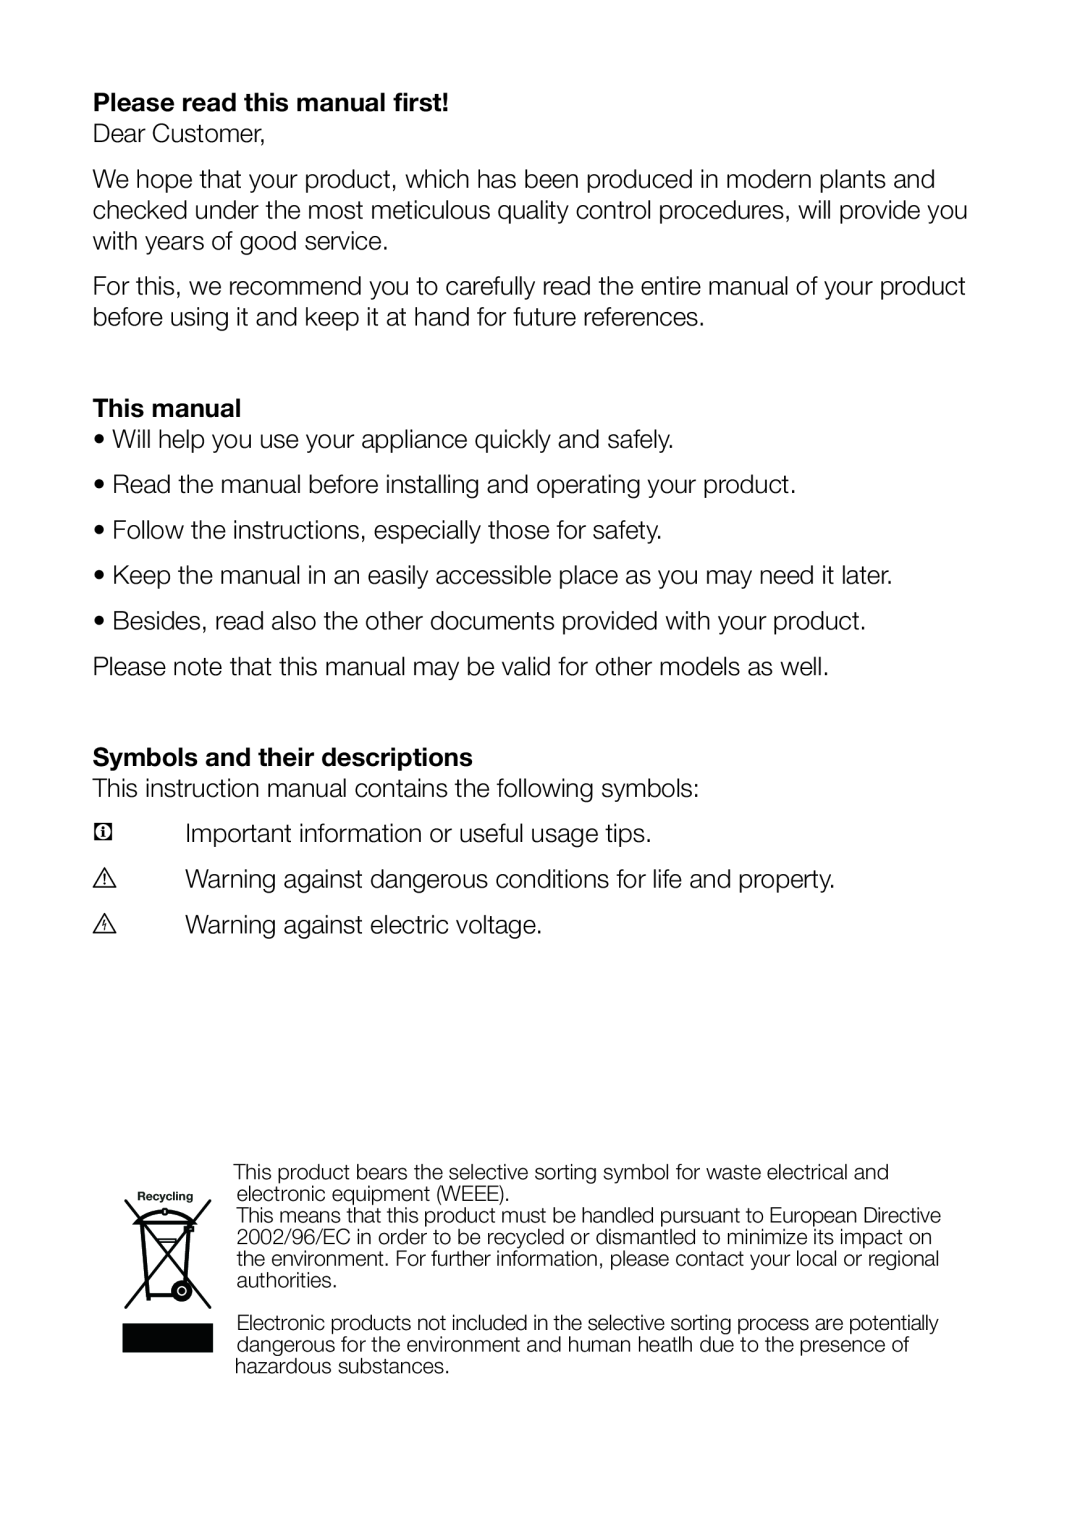 Beko GNEV220S Please read this manual first, This manual, Symbols and their descriptions 